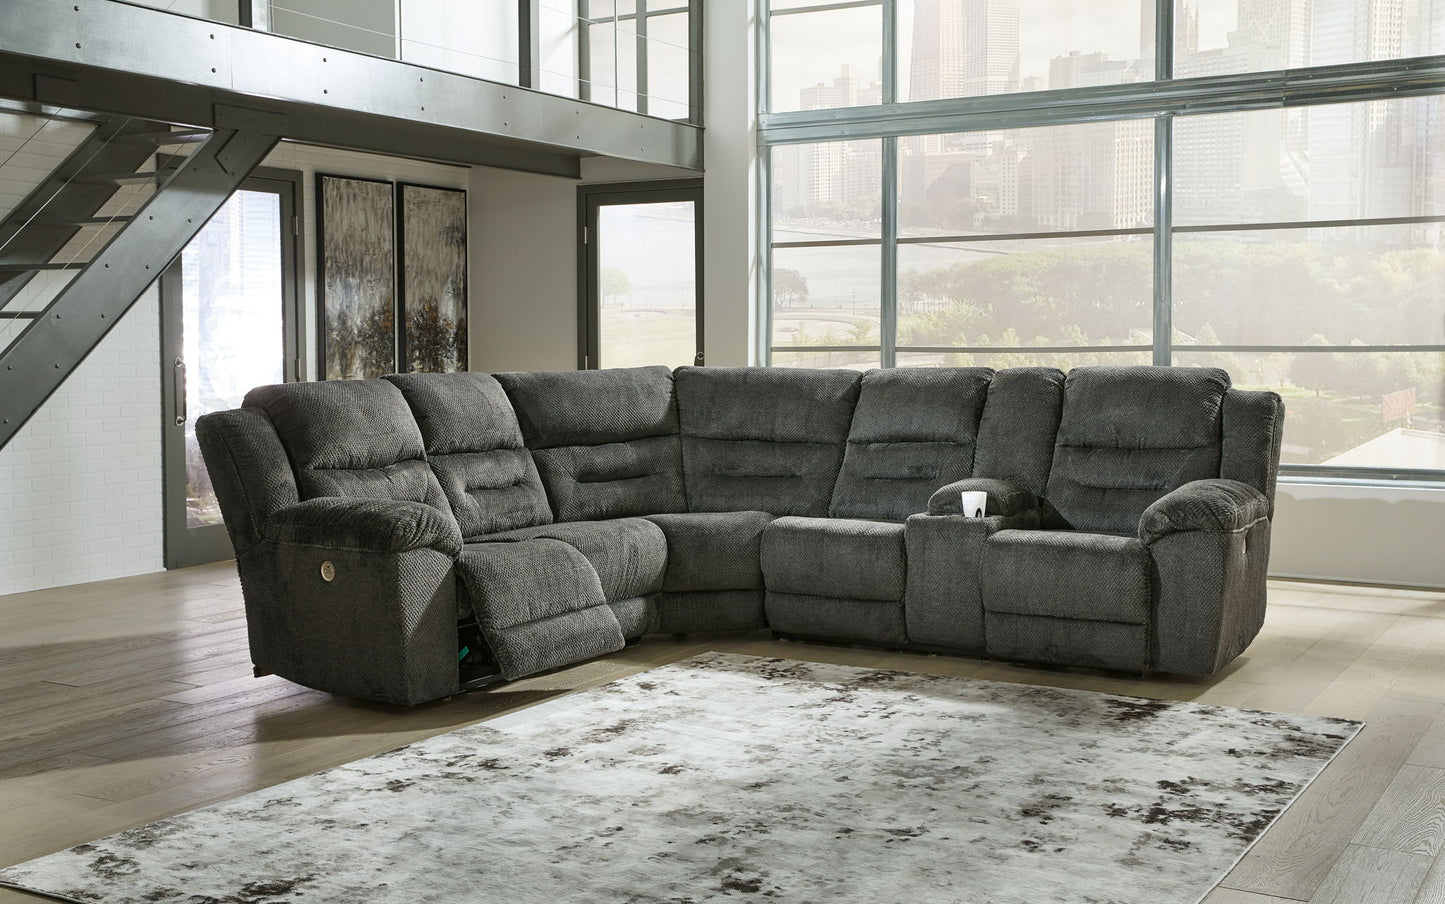 Nettington - Smoke - 3-Piece Power Reclining Sectional With Raf Pwr Rec Loveseat W/Console